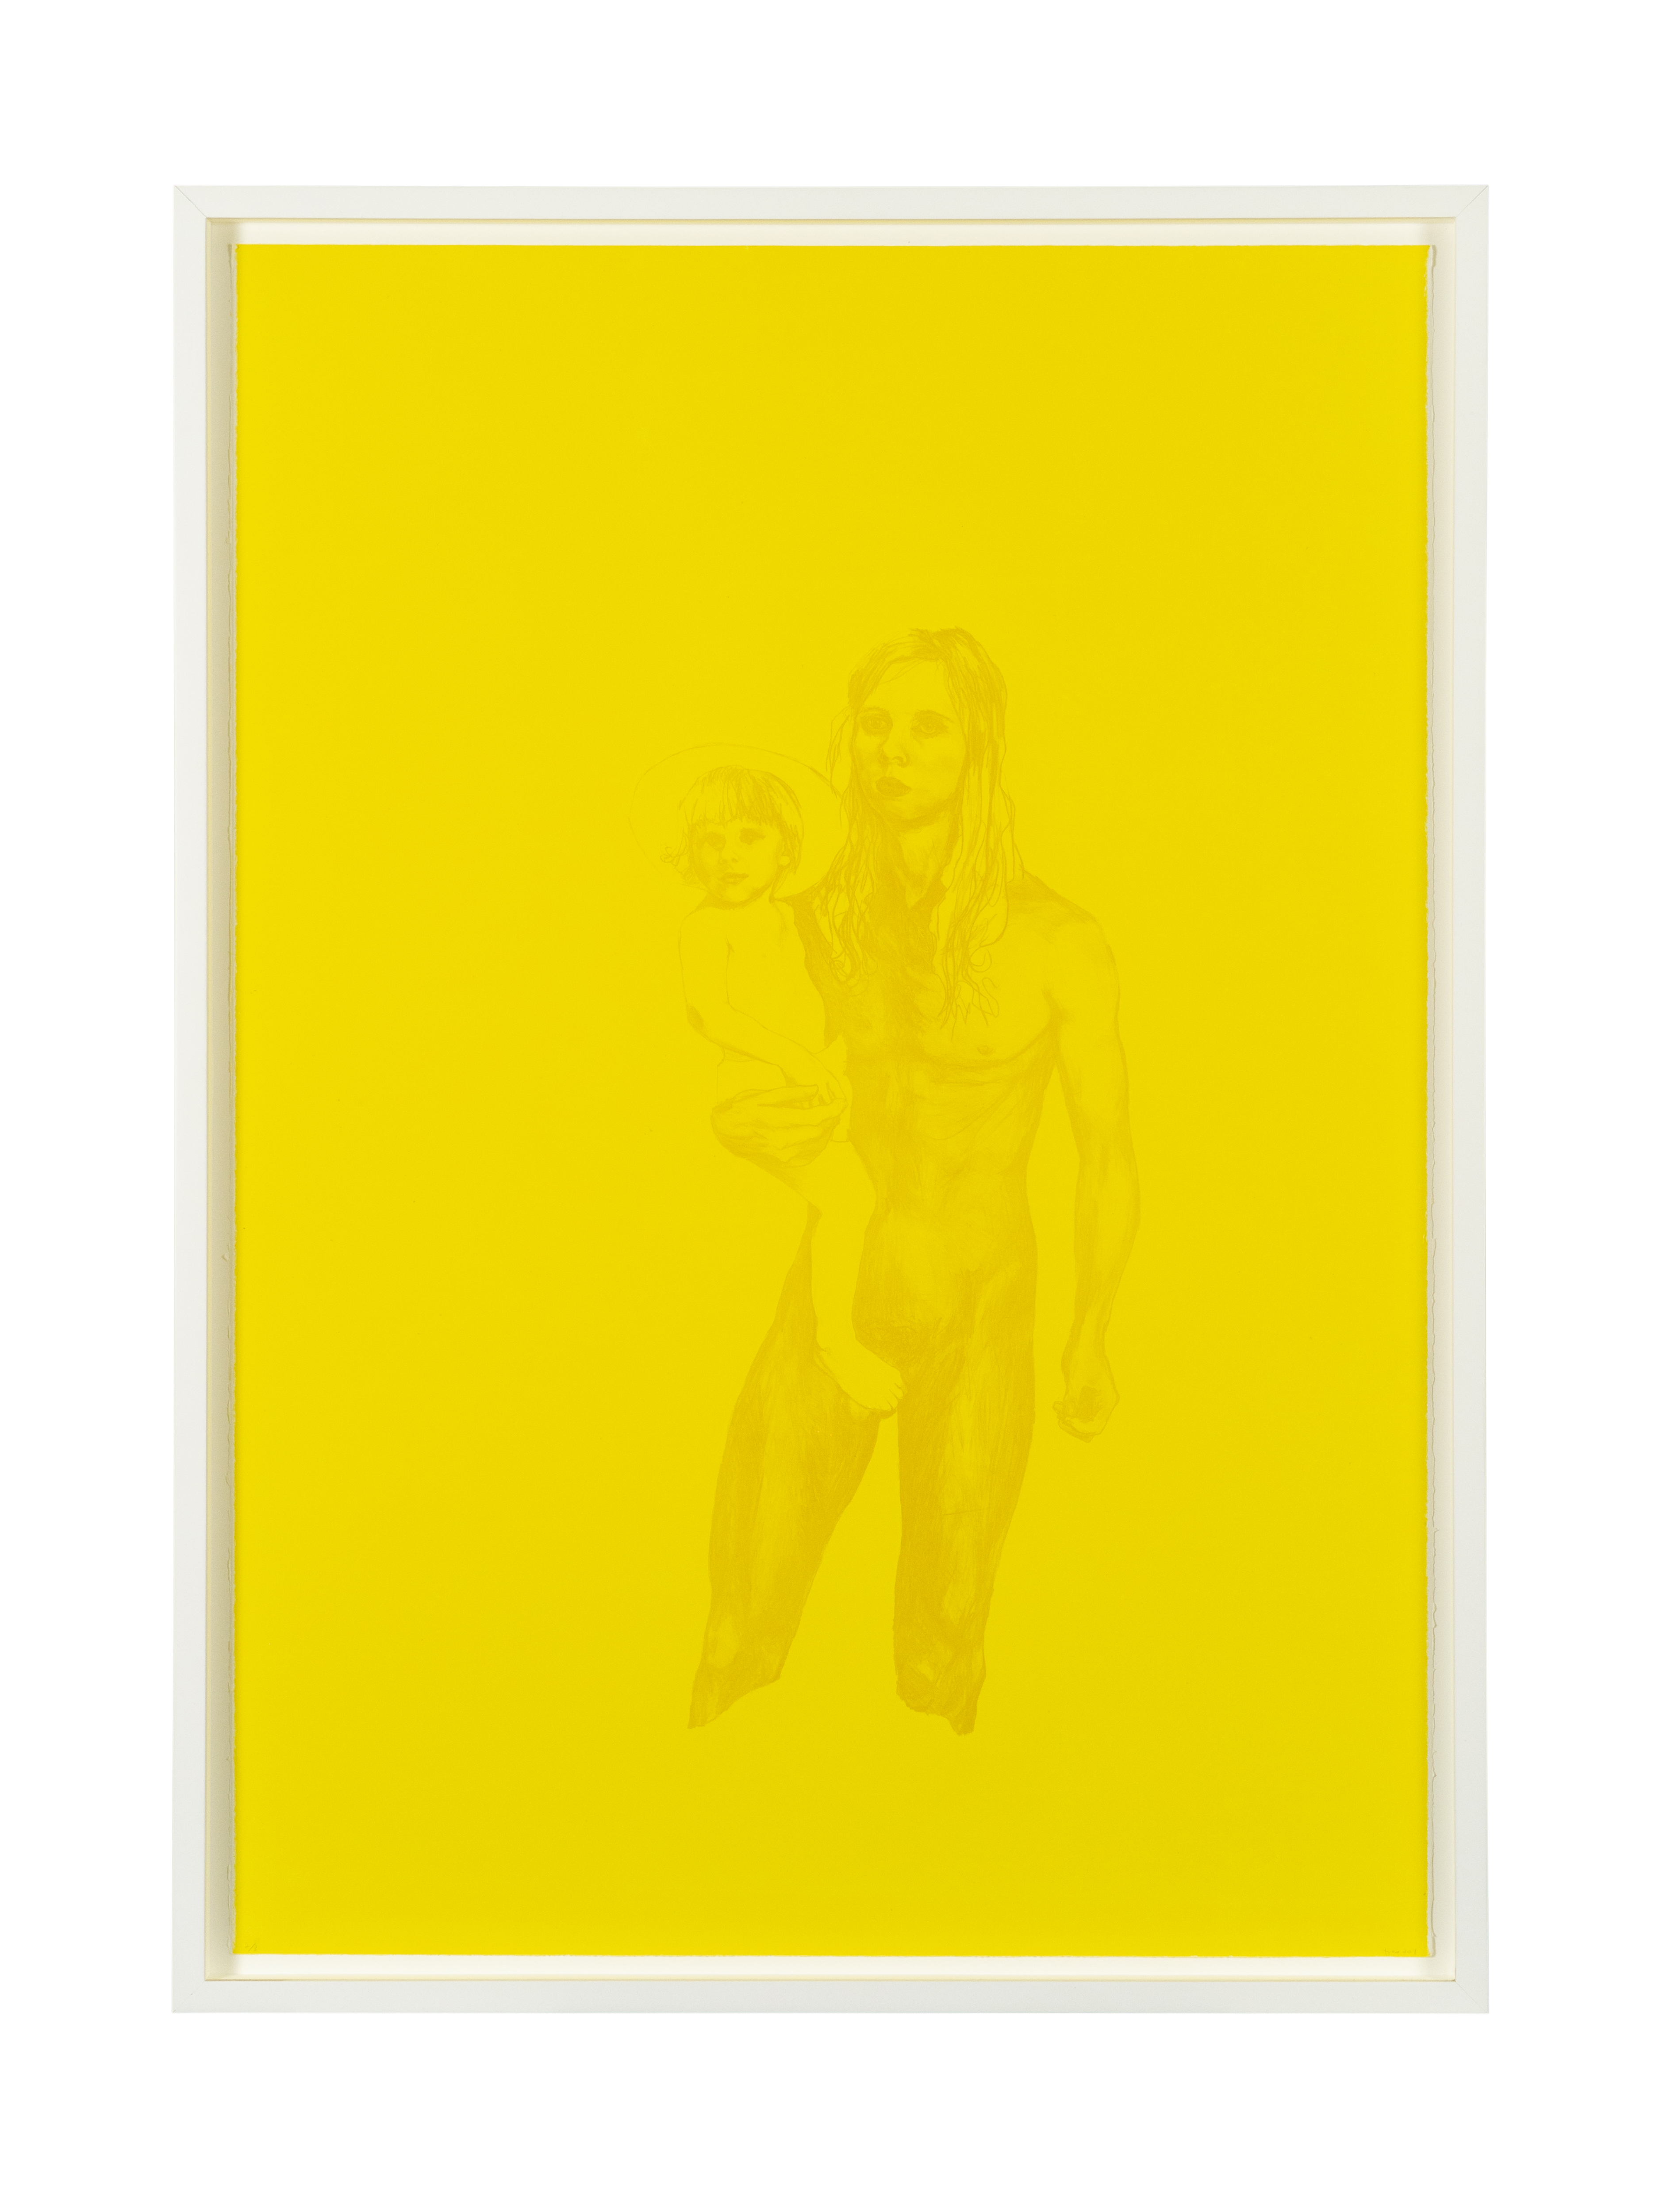 A portrait of an adult with long hair holding a young child. Both figures are nude and depicted faintly against a bright yellow background. 